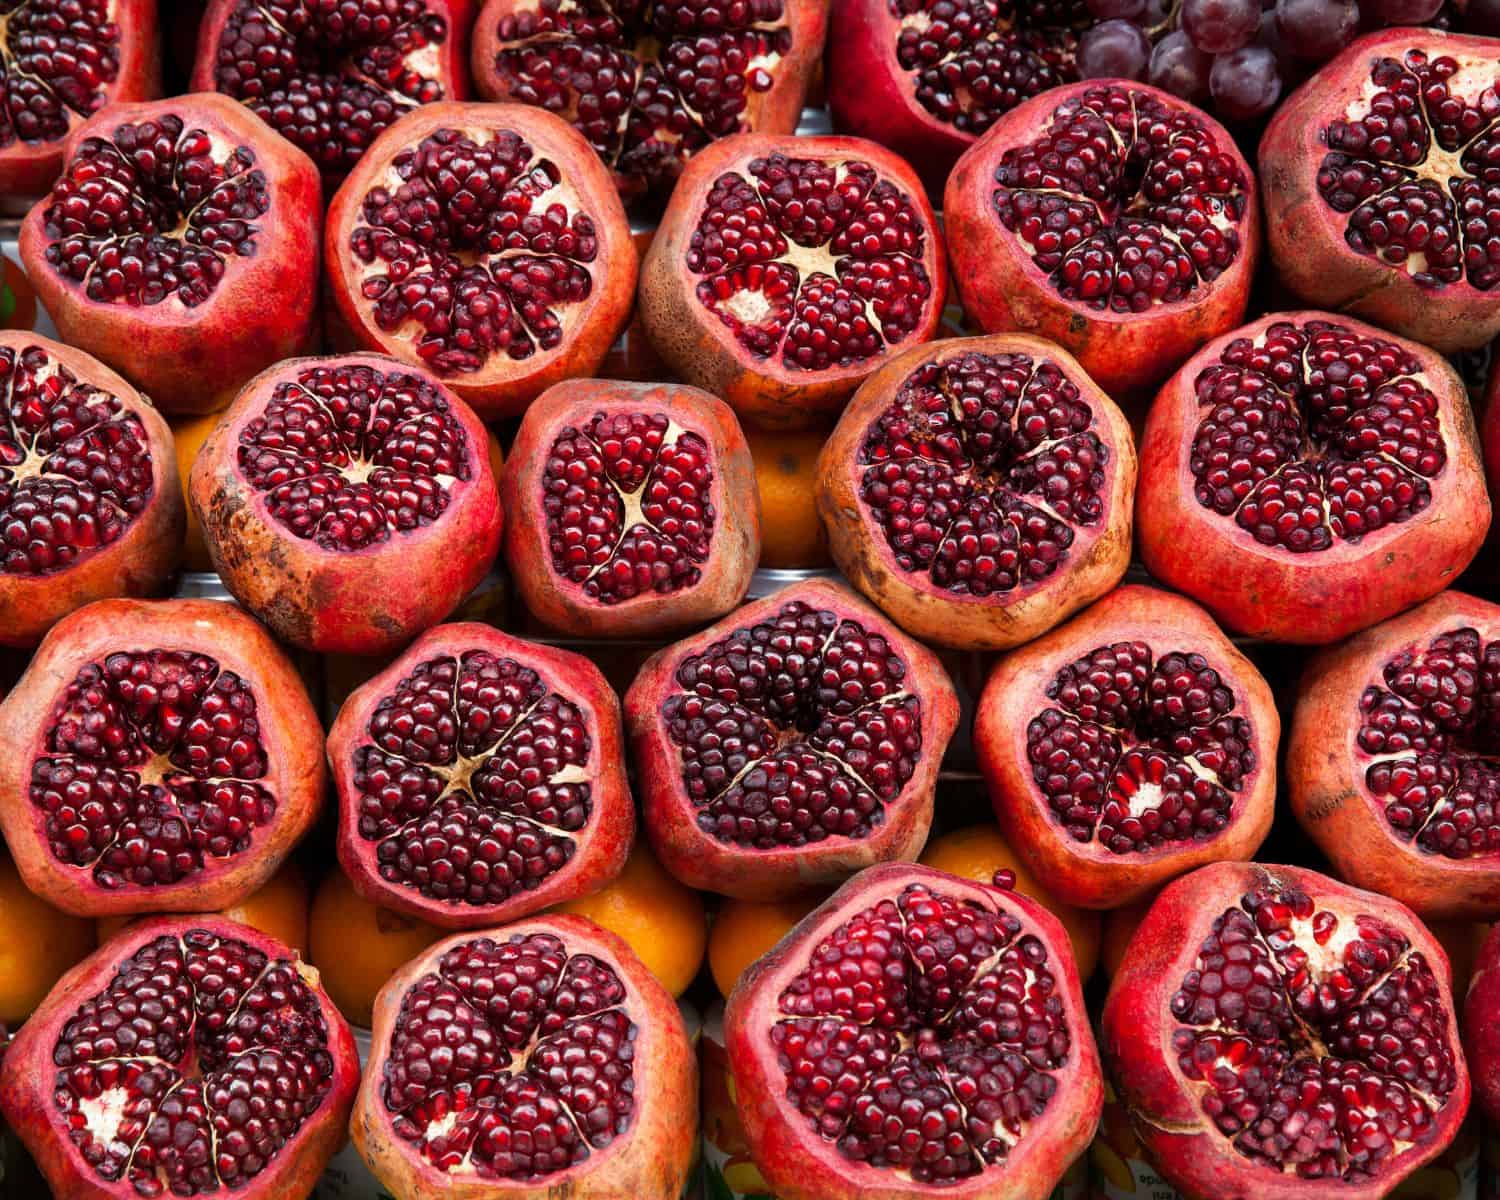 pomegranates with their tops cut off, revealing the inner arils, fill the frame of a photo.